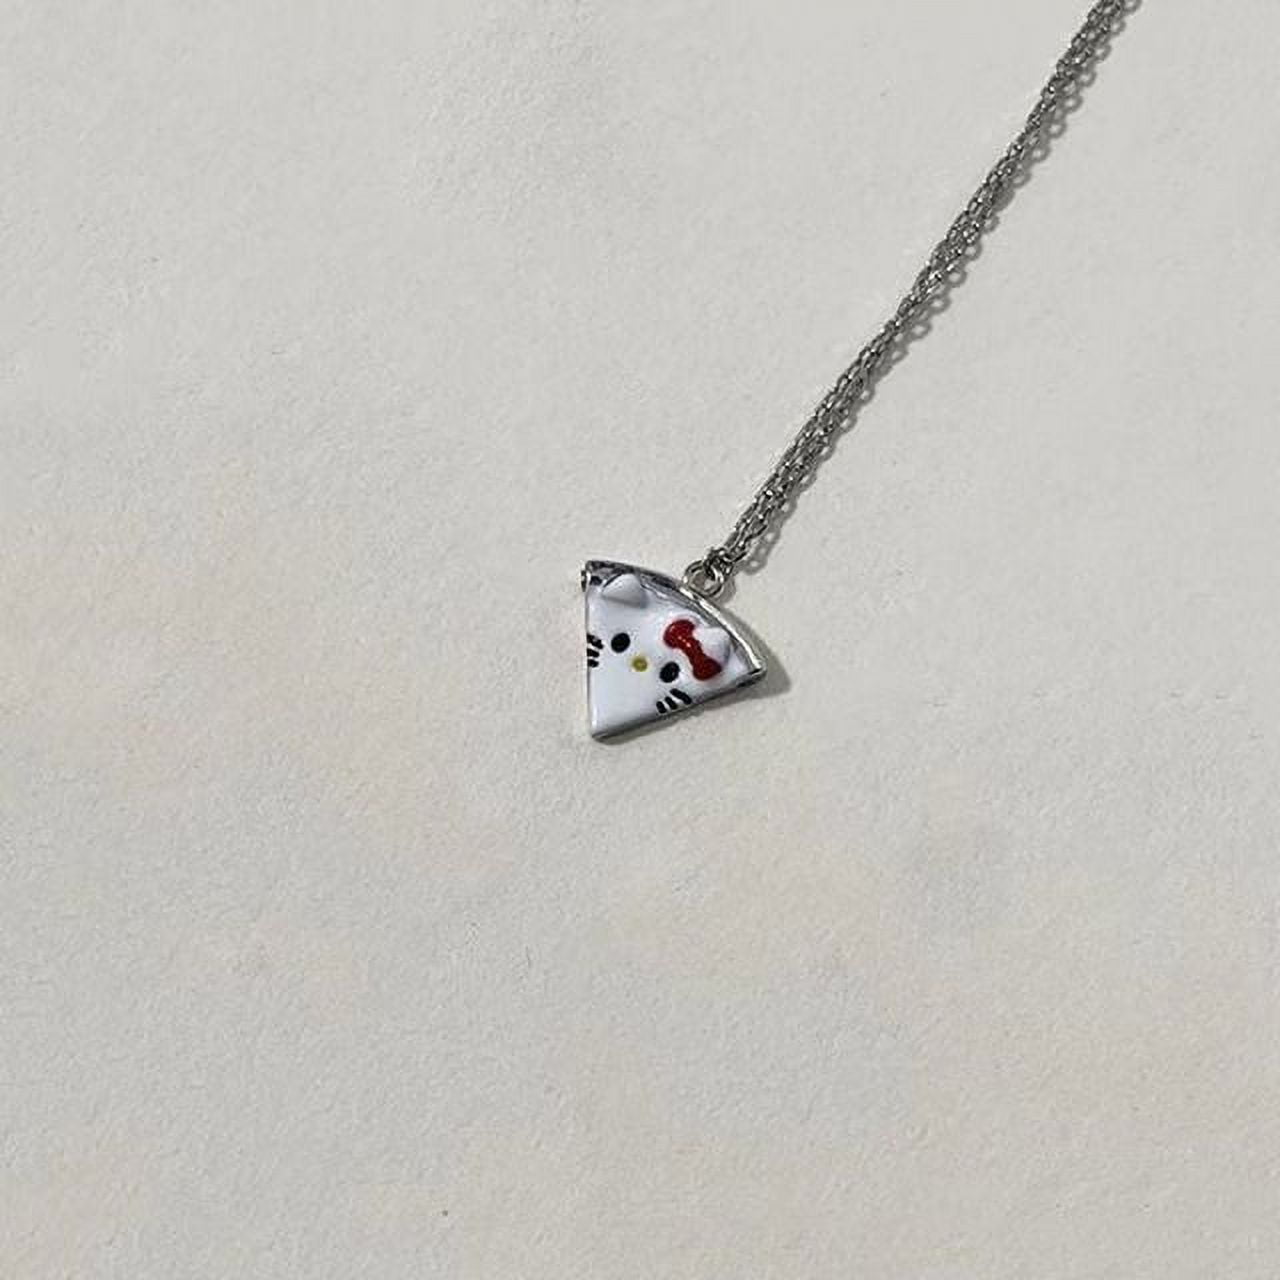 New Sanrio Hello Kitty Kuromi My Melody Necklace Cute Pendant Magnetic Sister Necklace Cartoon Fashion Jewelry Friend Gift 482b810a f845 4fb9 8e43 57af5ac1cdf7.ee45e47ab717898e507efdb810ce9fda